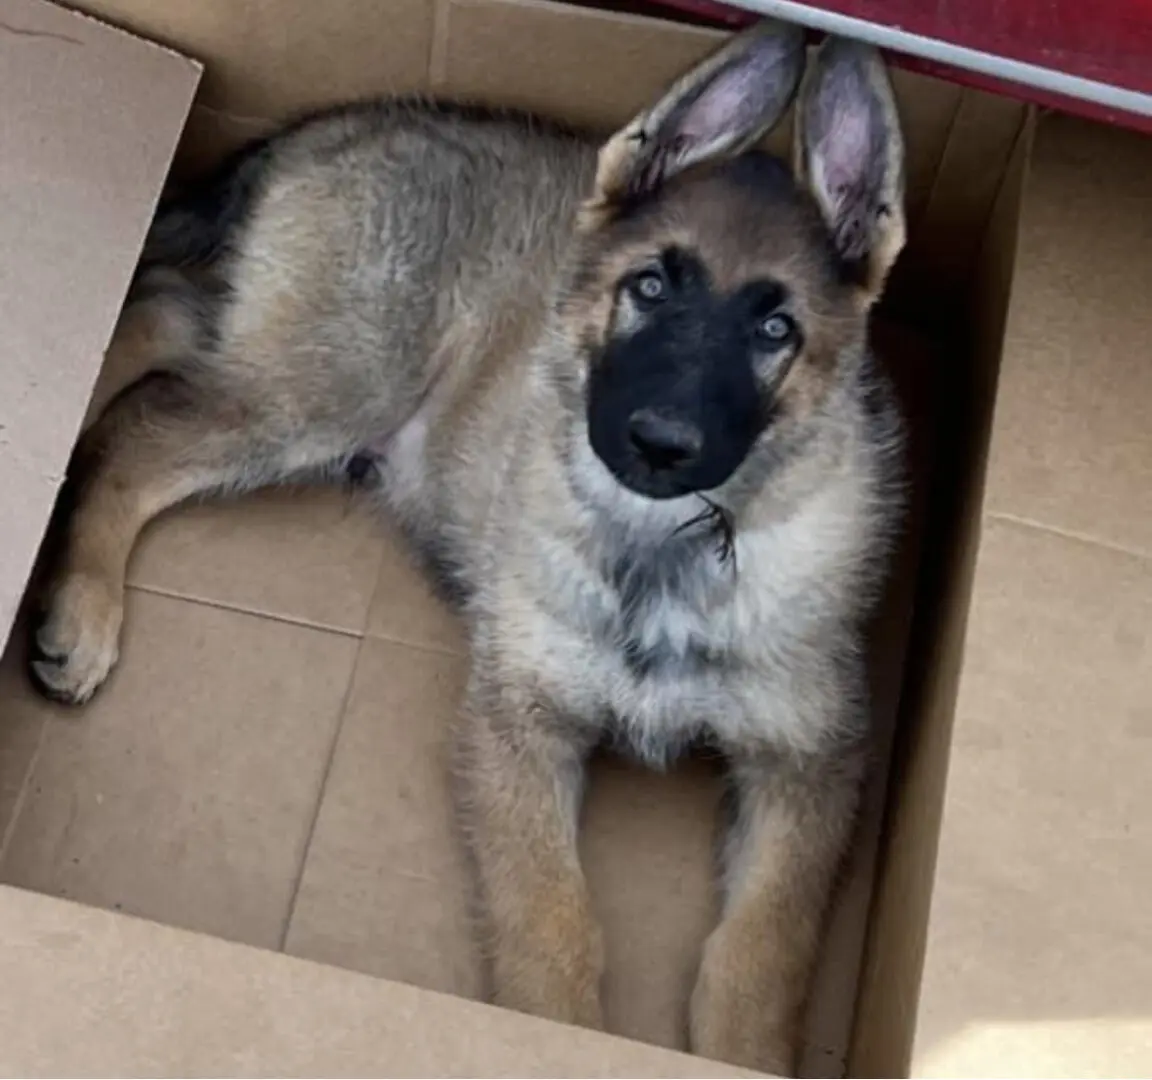 A puppy is laying in the box on the floor.